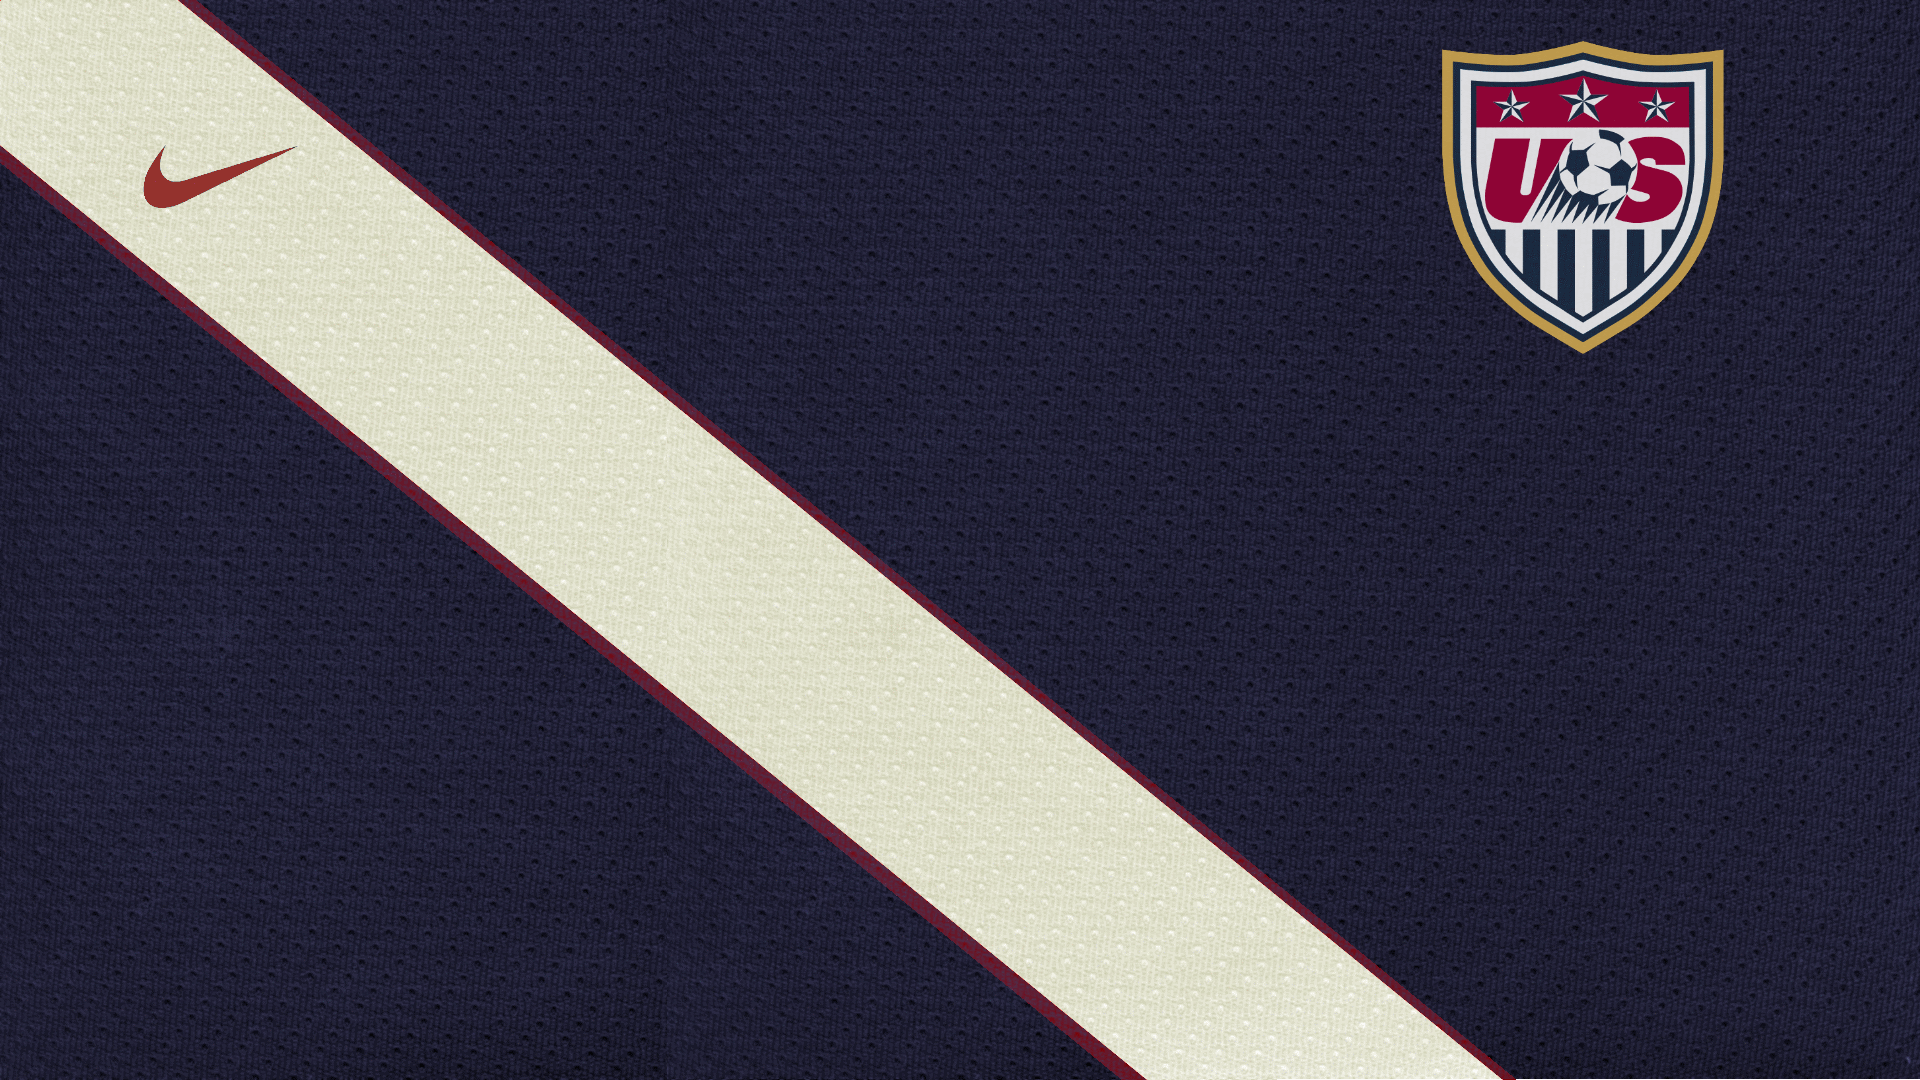 United States Football Wallpaper Backgrounds and Picture 1920x1080